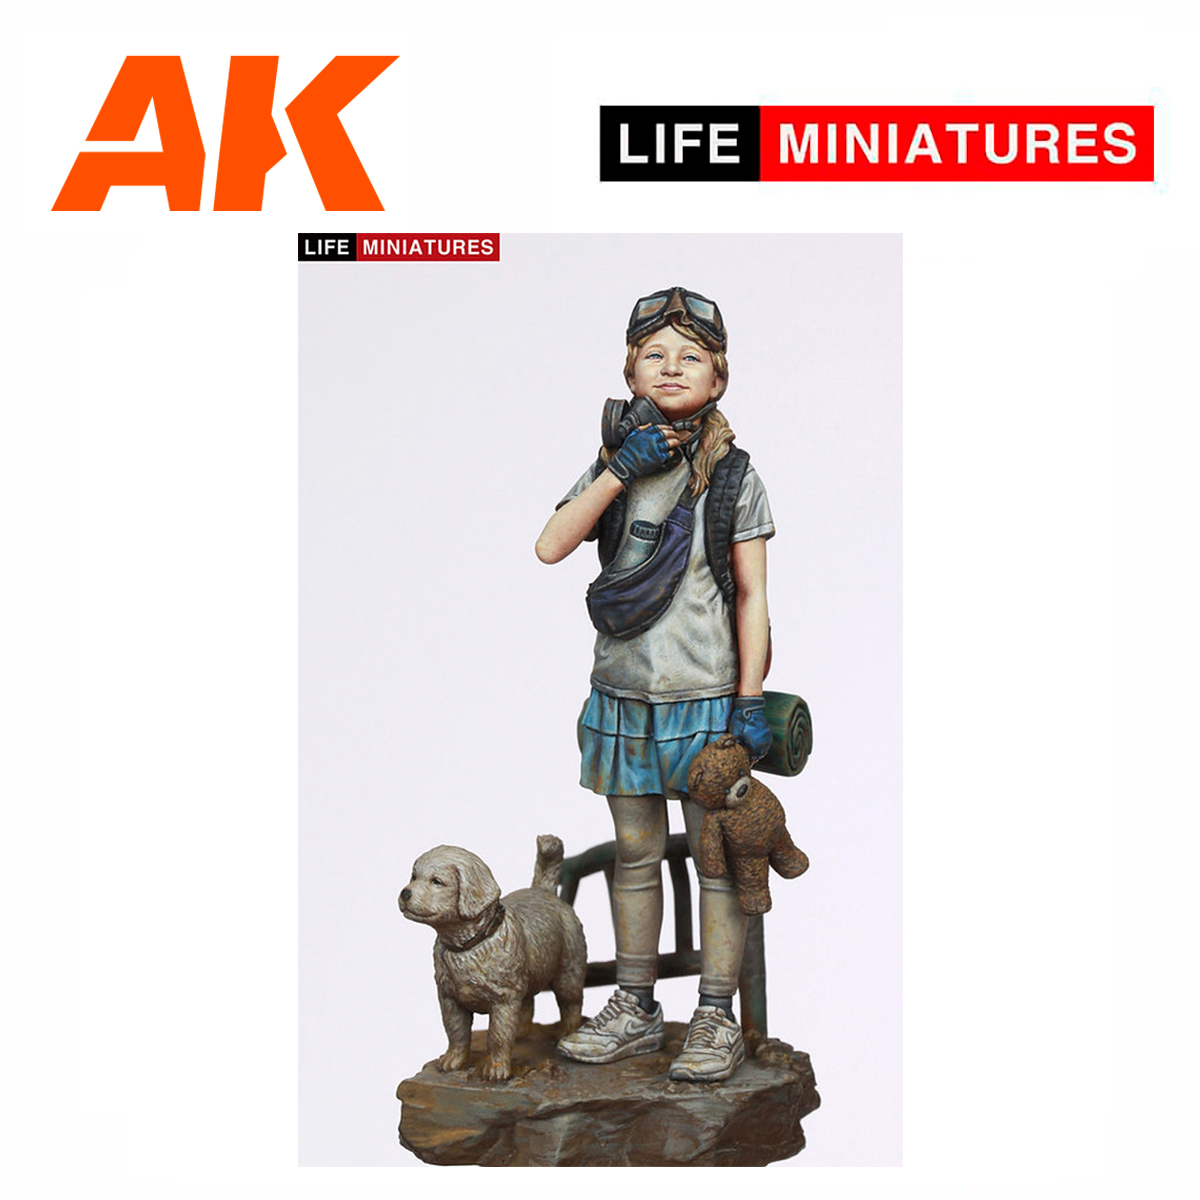 Life Miniatures – BREATH – Post Pandemic Kid (1/12 scale)